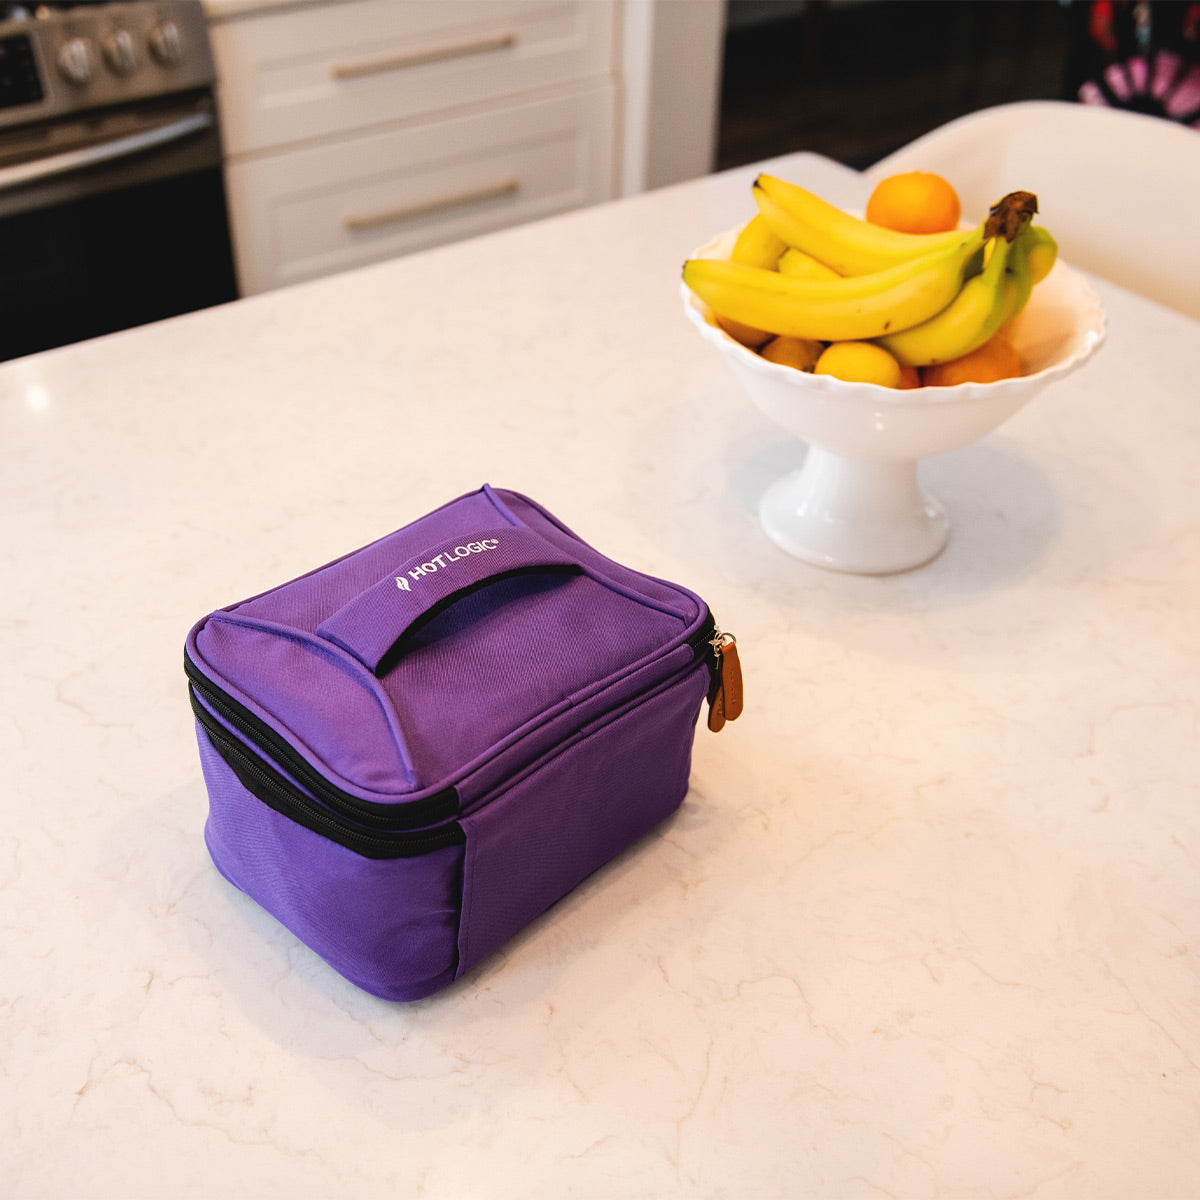 HOTLOGIC 12V Mini XP Portable Food Warmer and Expandable Carrying Bag for Vehicle (Purple)